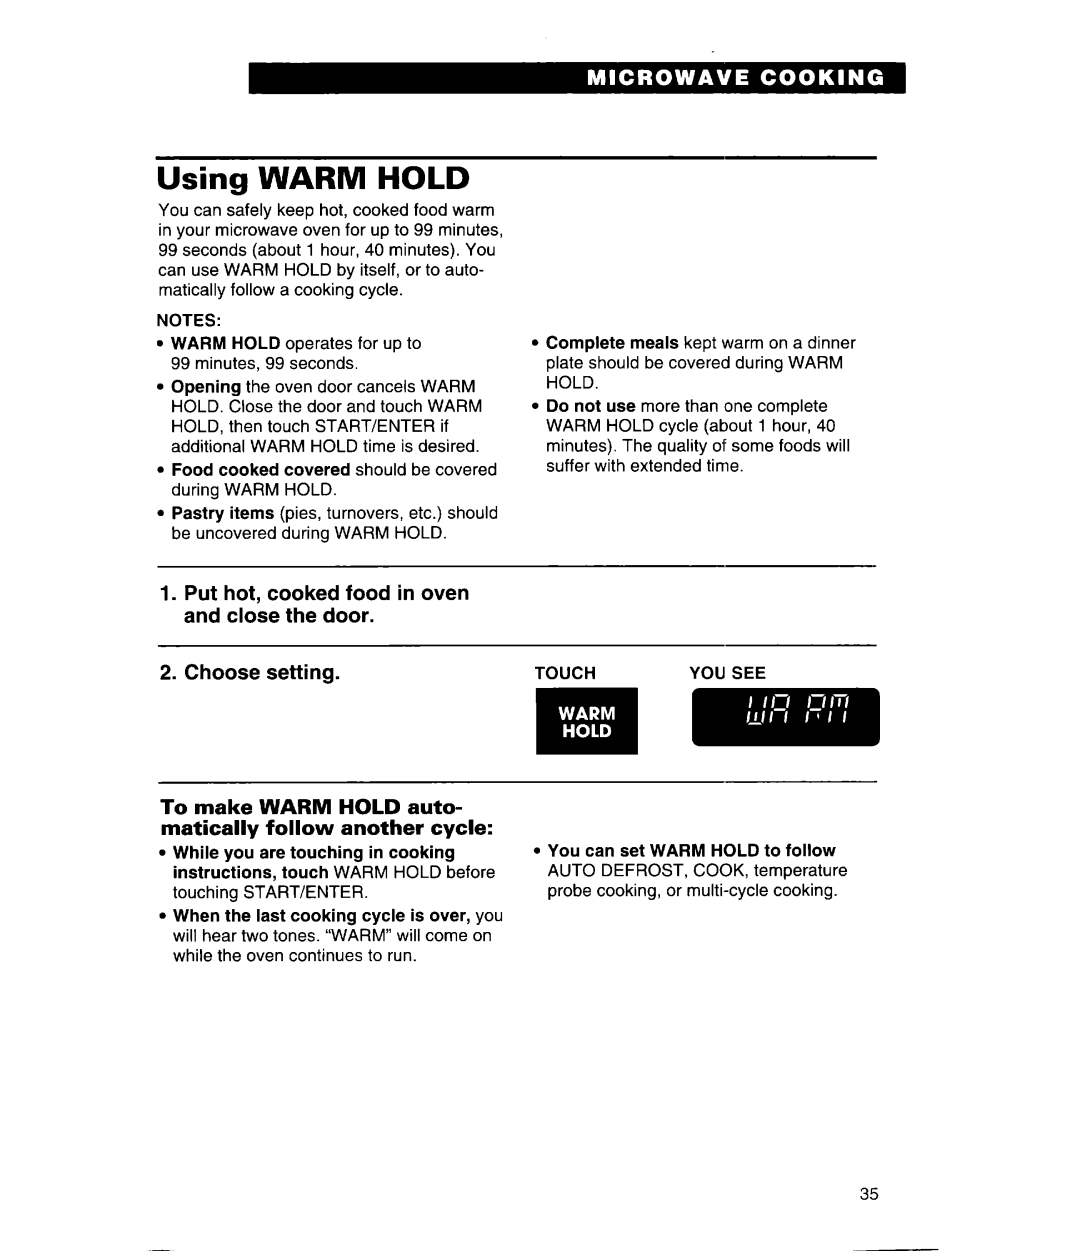 Whirlpool GH9115XE, MH9115XE warranty Using WARM HOLD, Put hot, cooked food in oven and close the door, Choose setting 